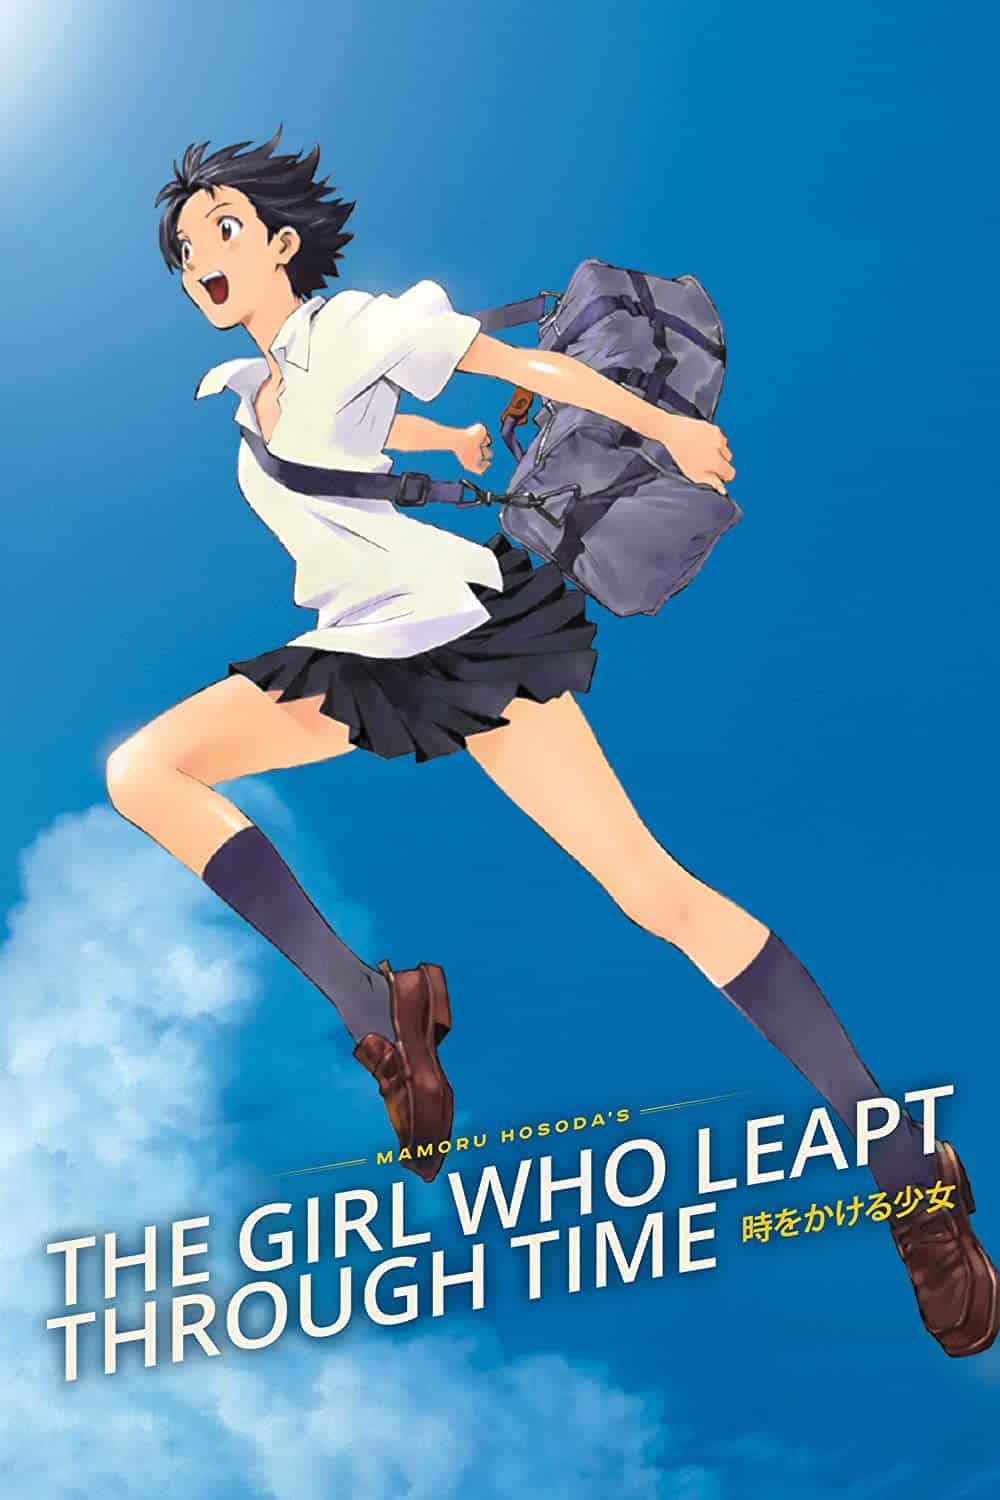 The Girl Who Leapt Through Time (2006) Best Time Loop Movies To Check Out